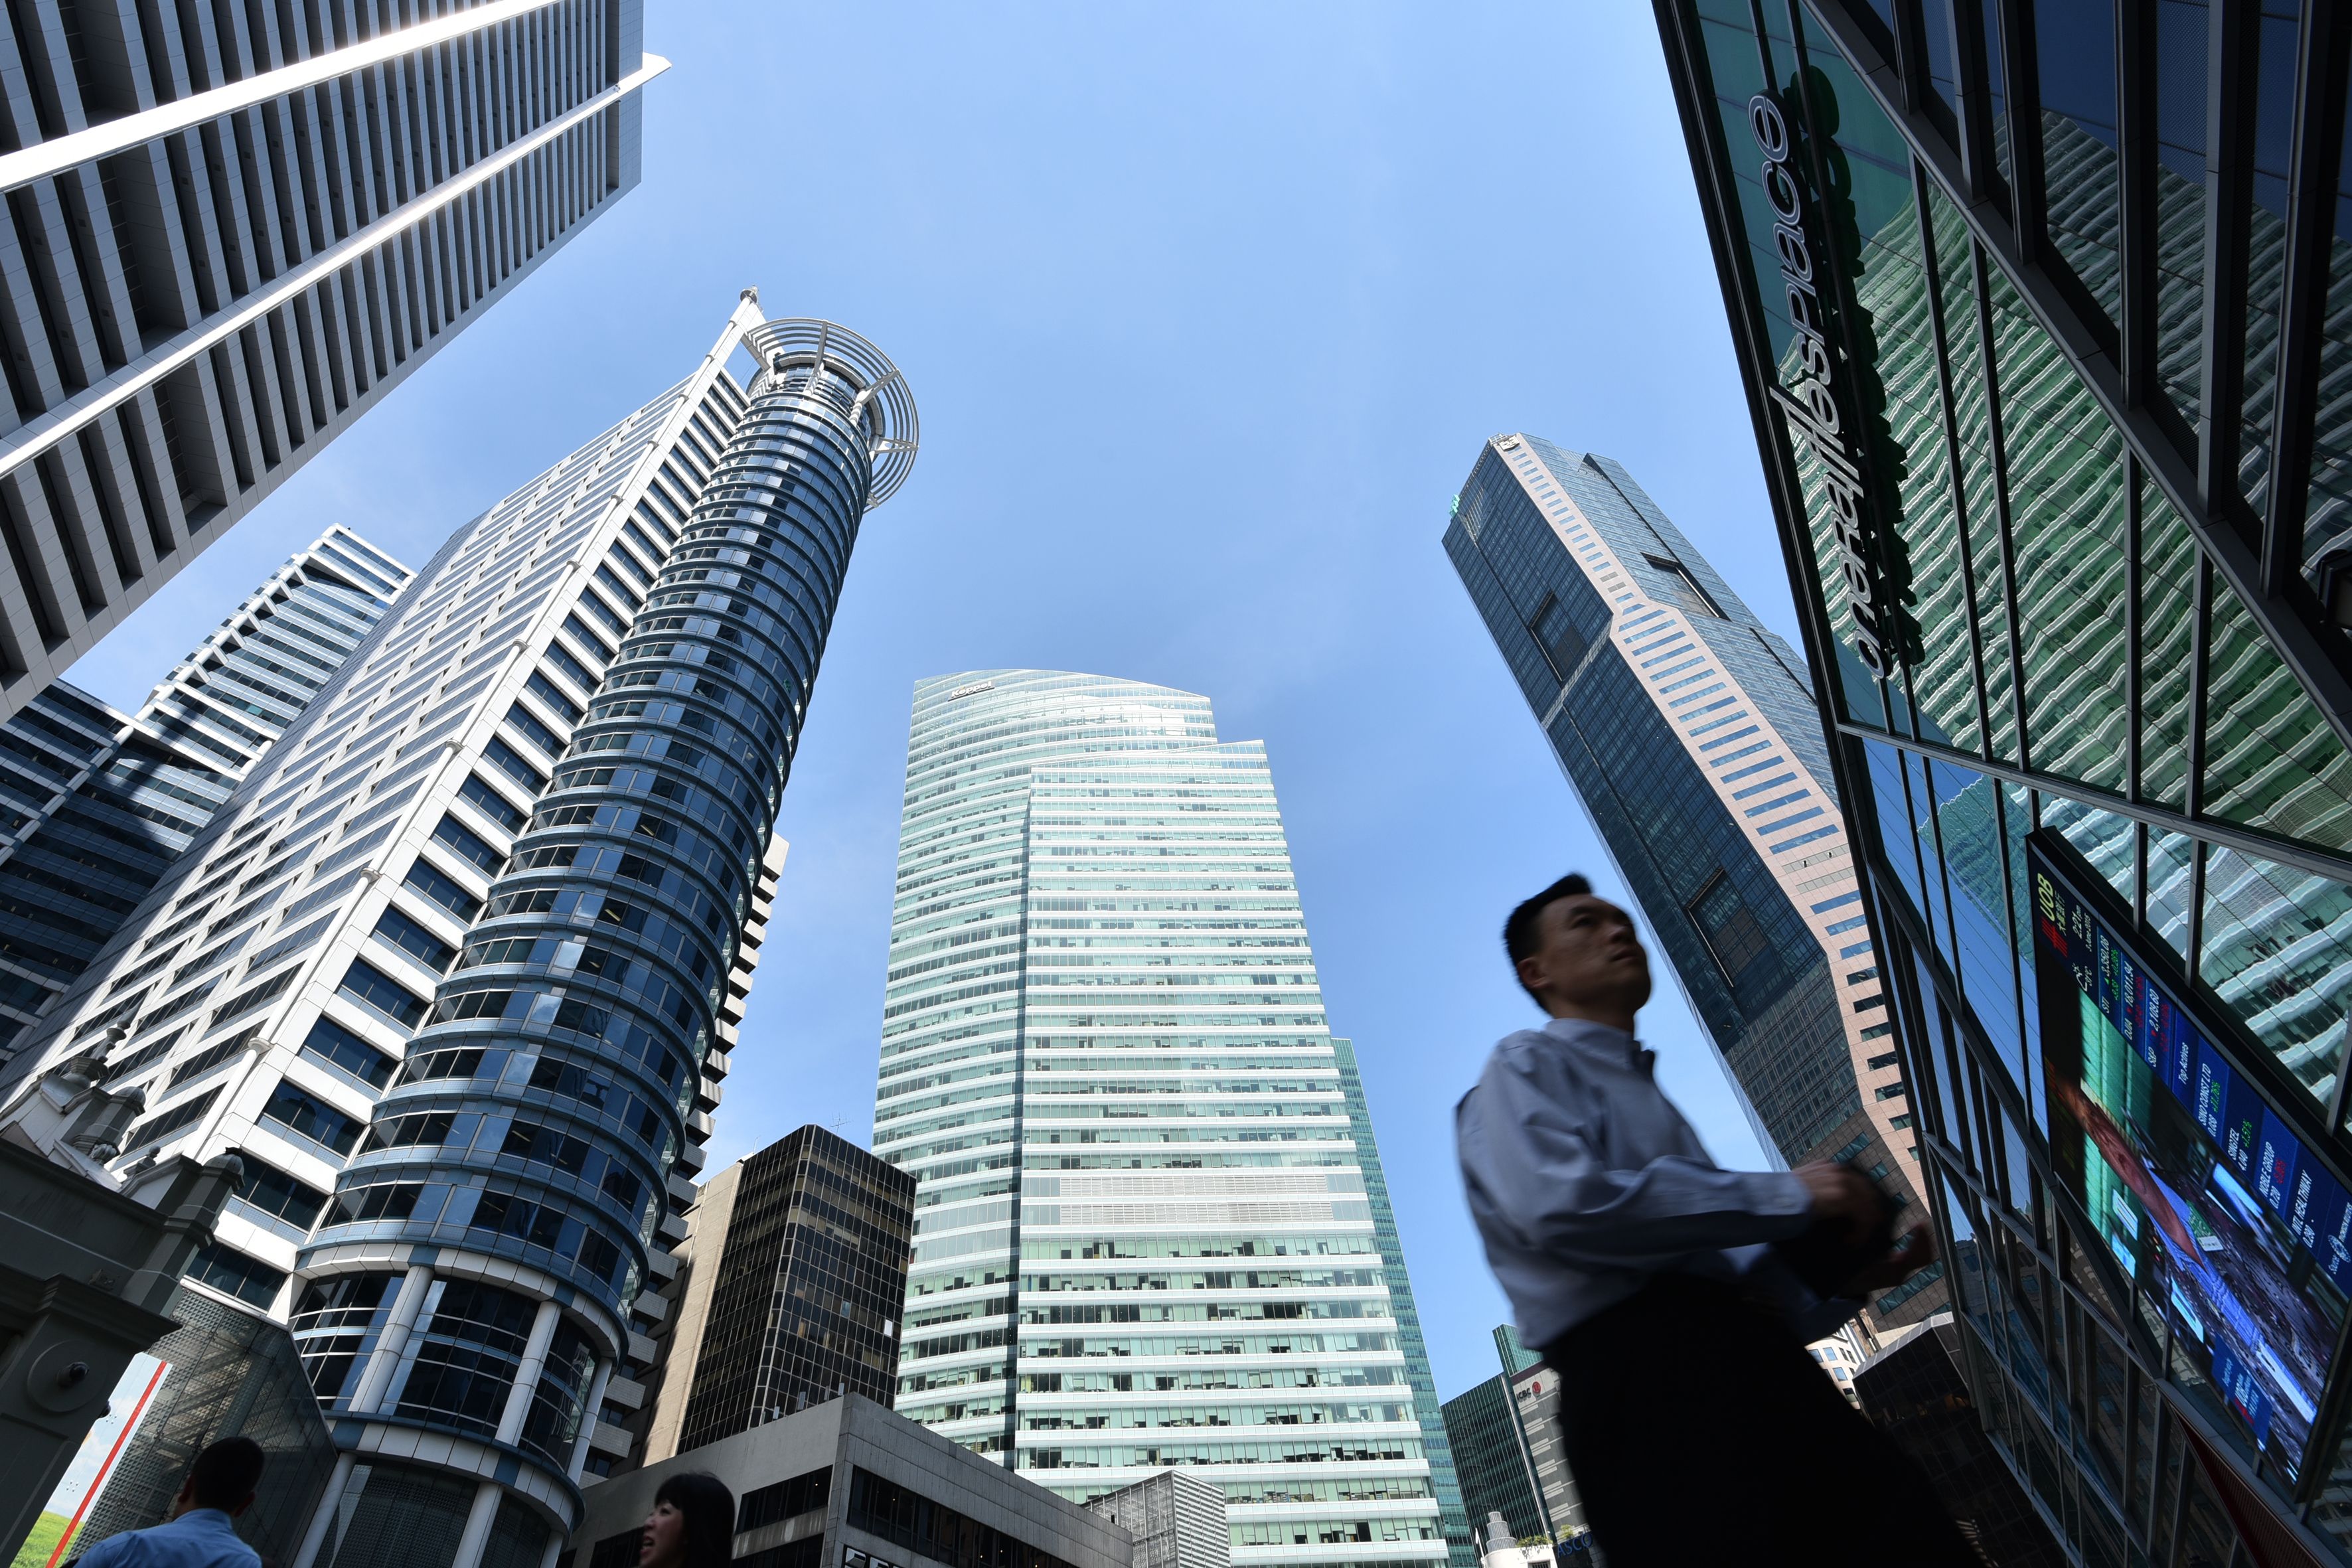 PhillipCapital: Singapore REITs Monthly – One step forward, one step back